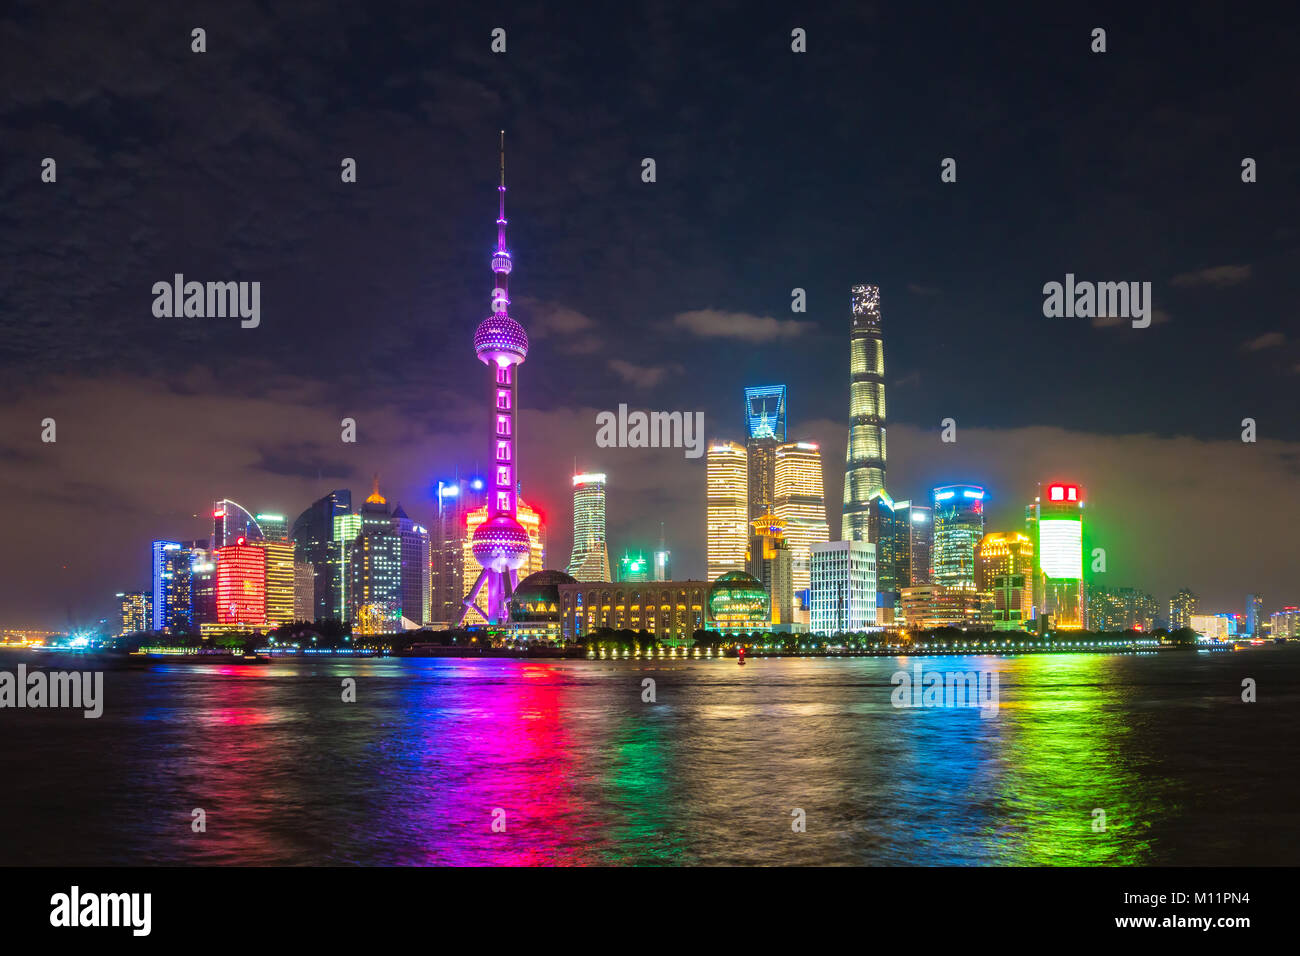 Pudong area of Shanghai at night Stock Photo